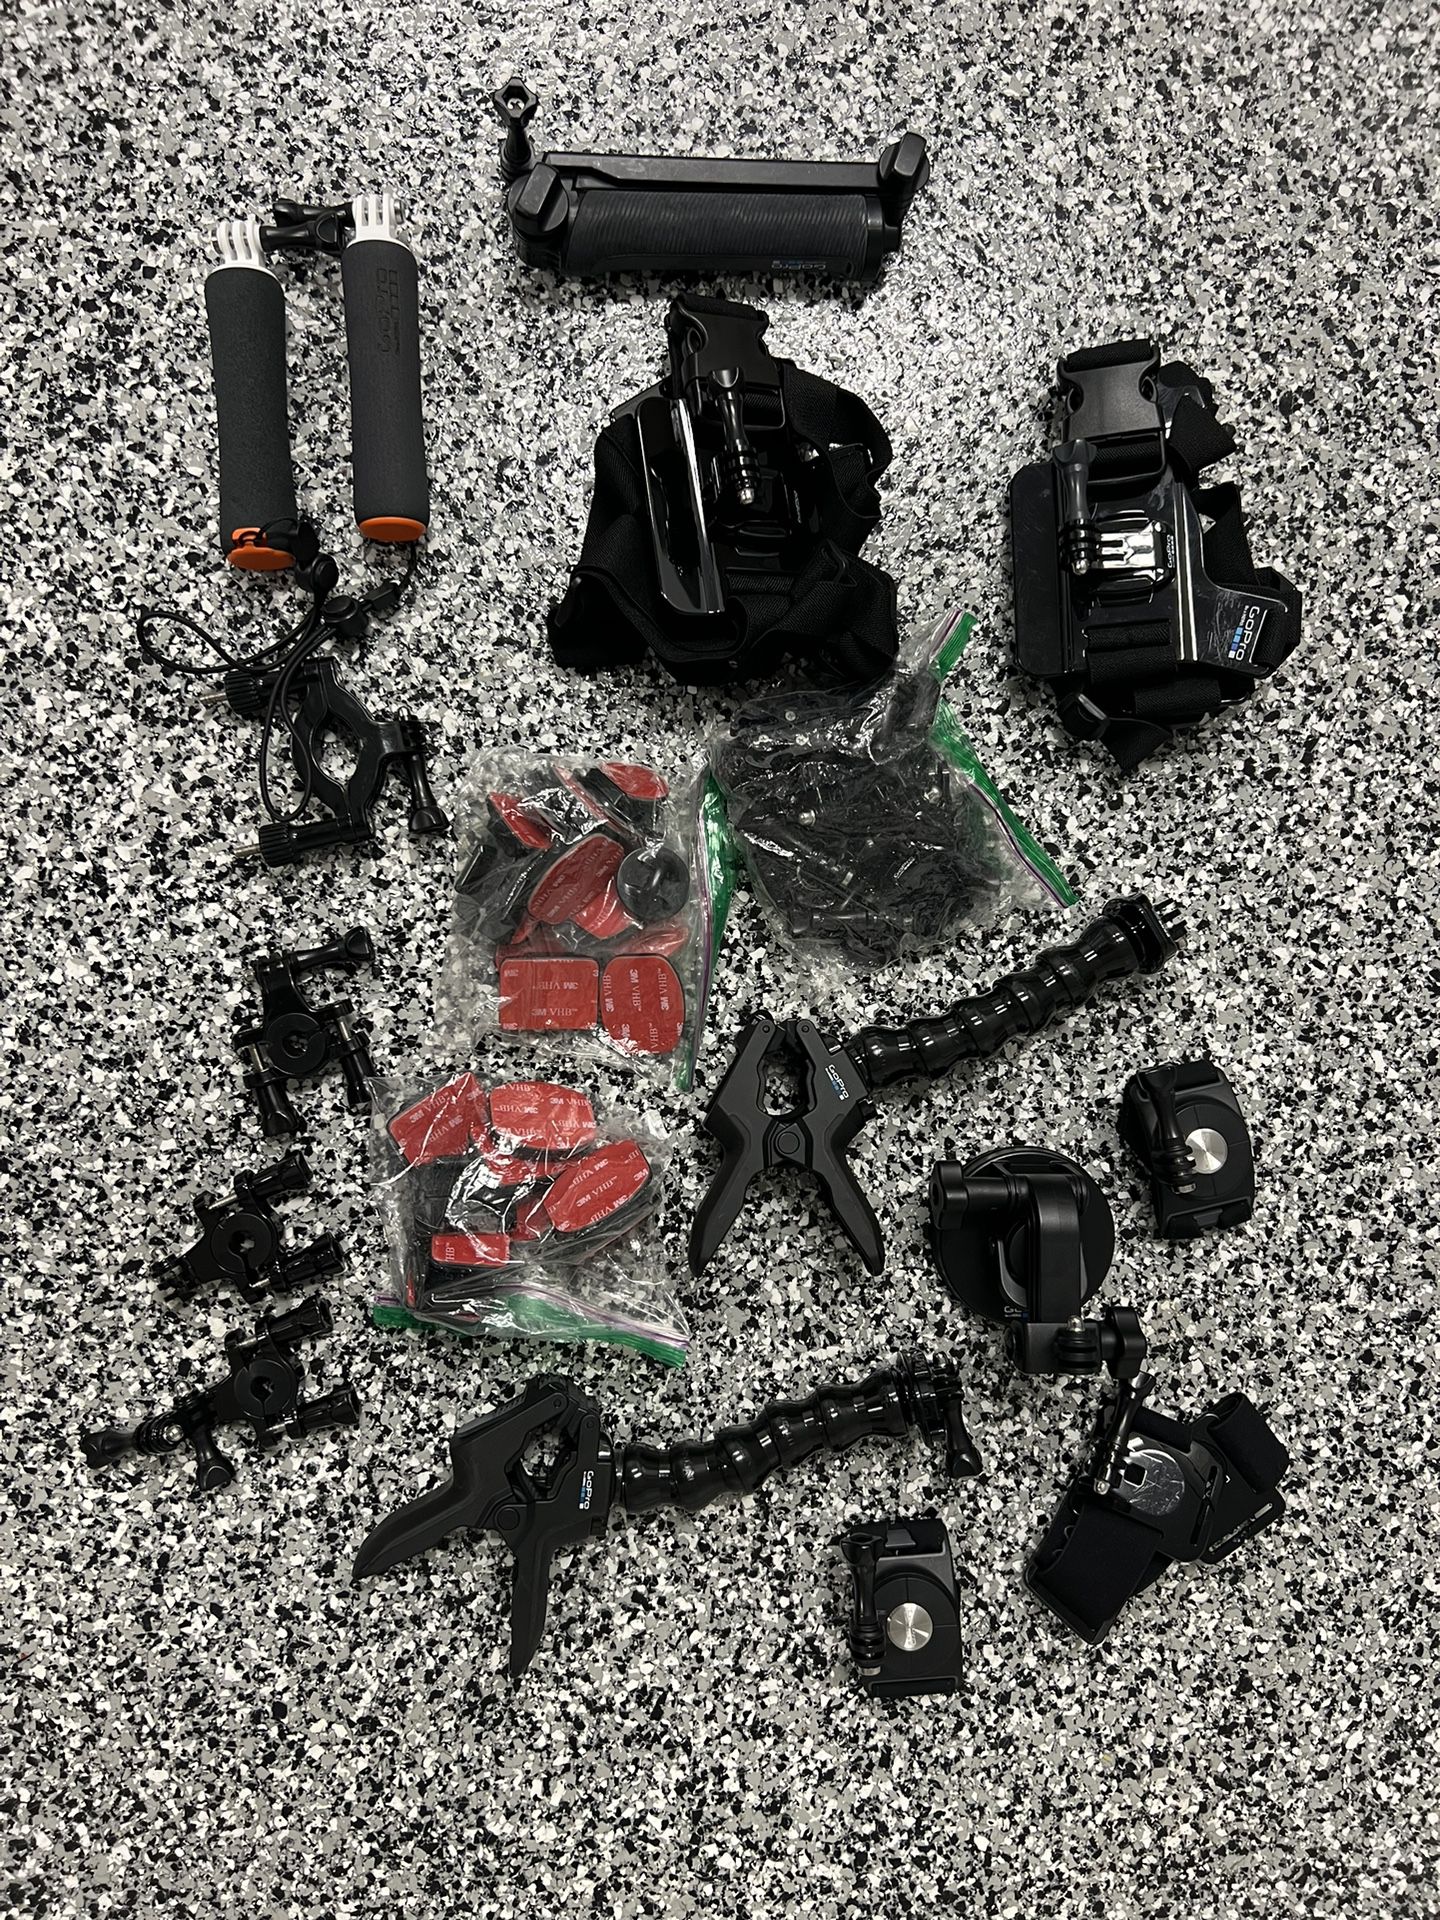 GoPro Accessories - Large collection!